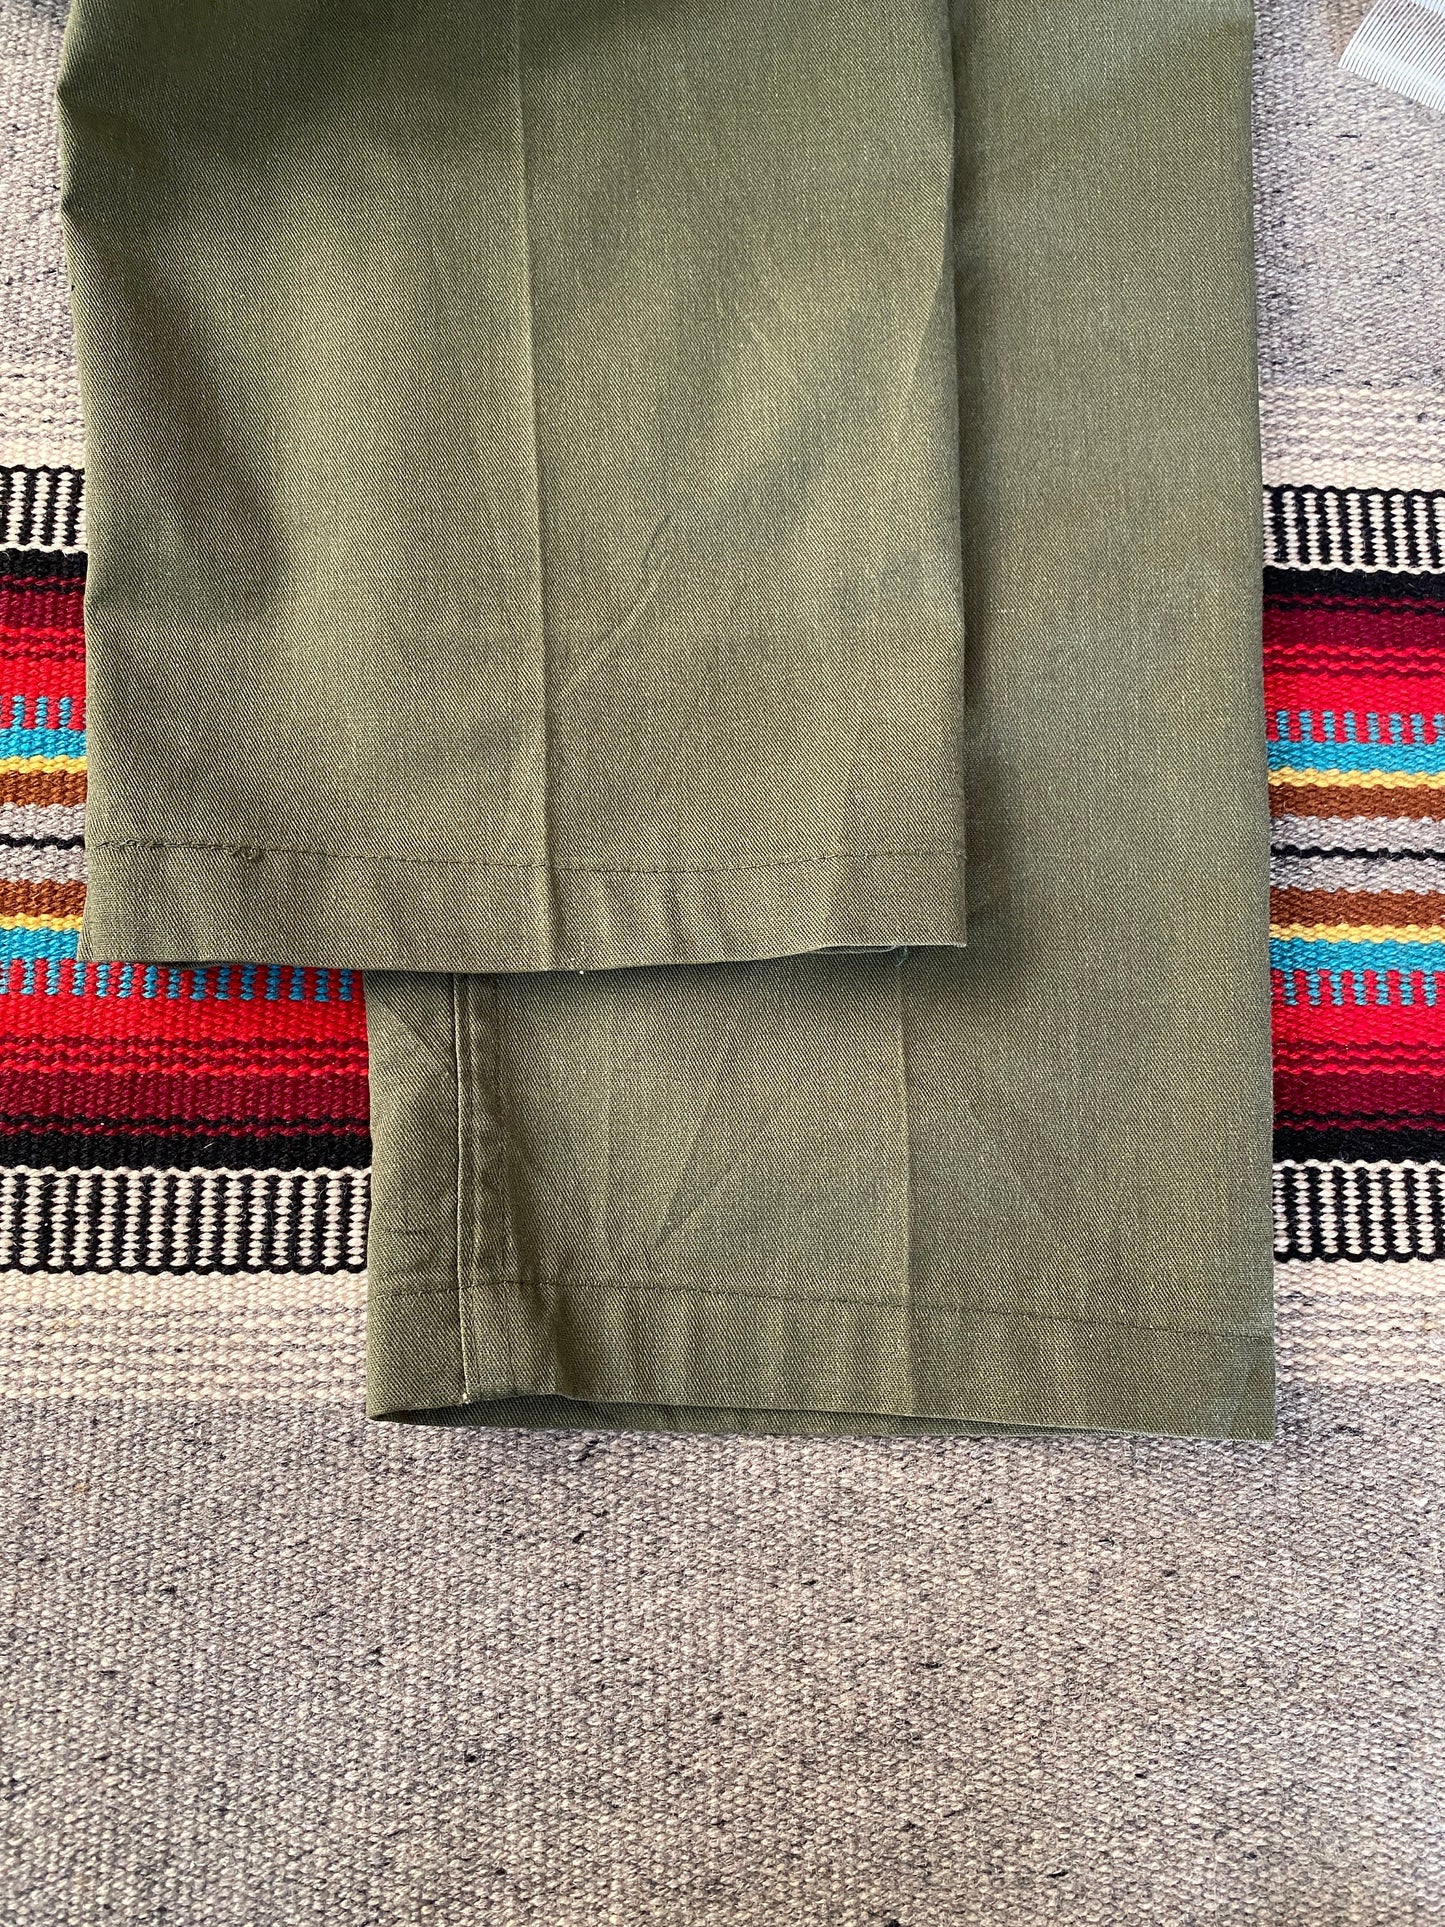 Authentic Vintage 1984 US Army OG-507 Fatigue Pants 30X31 | Classic Military Wear